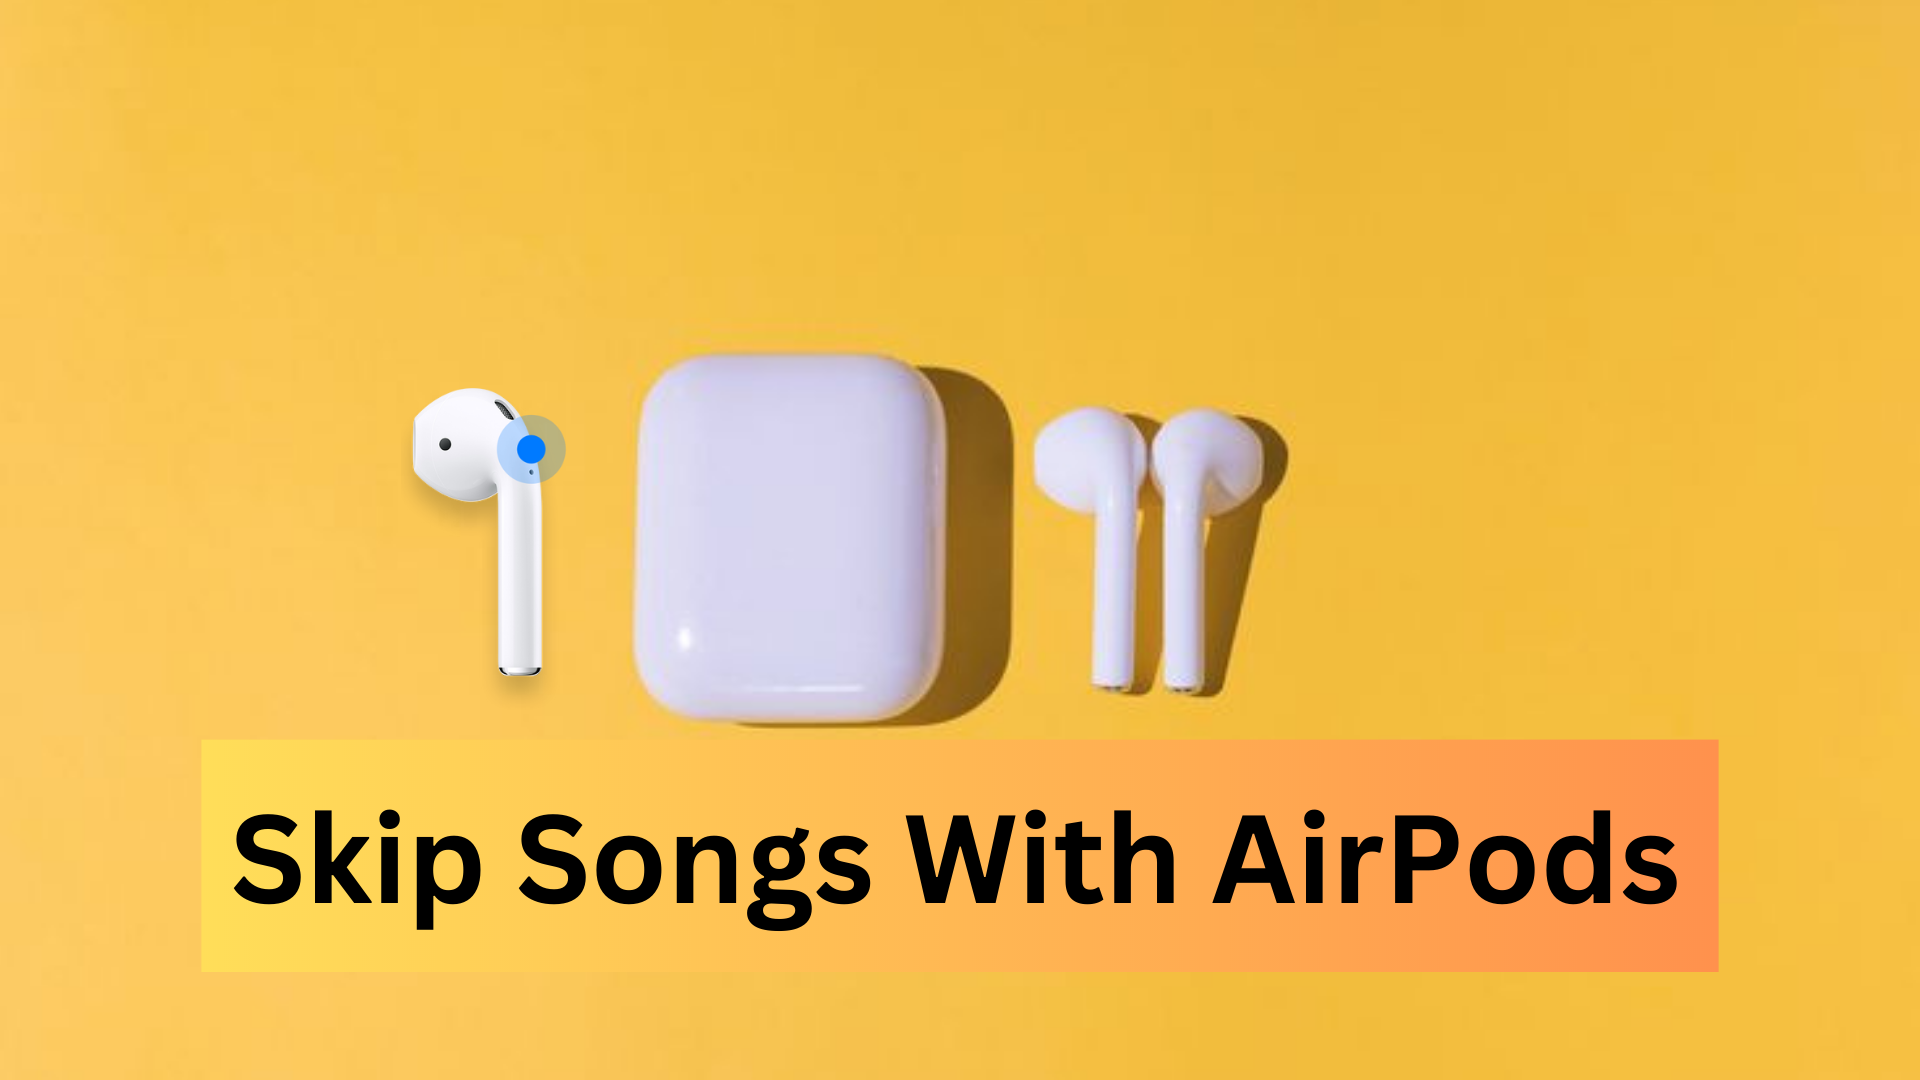 How to skip songs with your AirPods or AirPods Pro using the double-tap or press-and-hold features